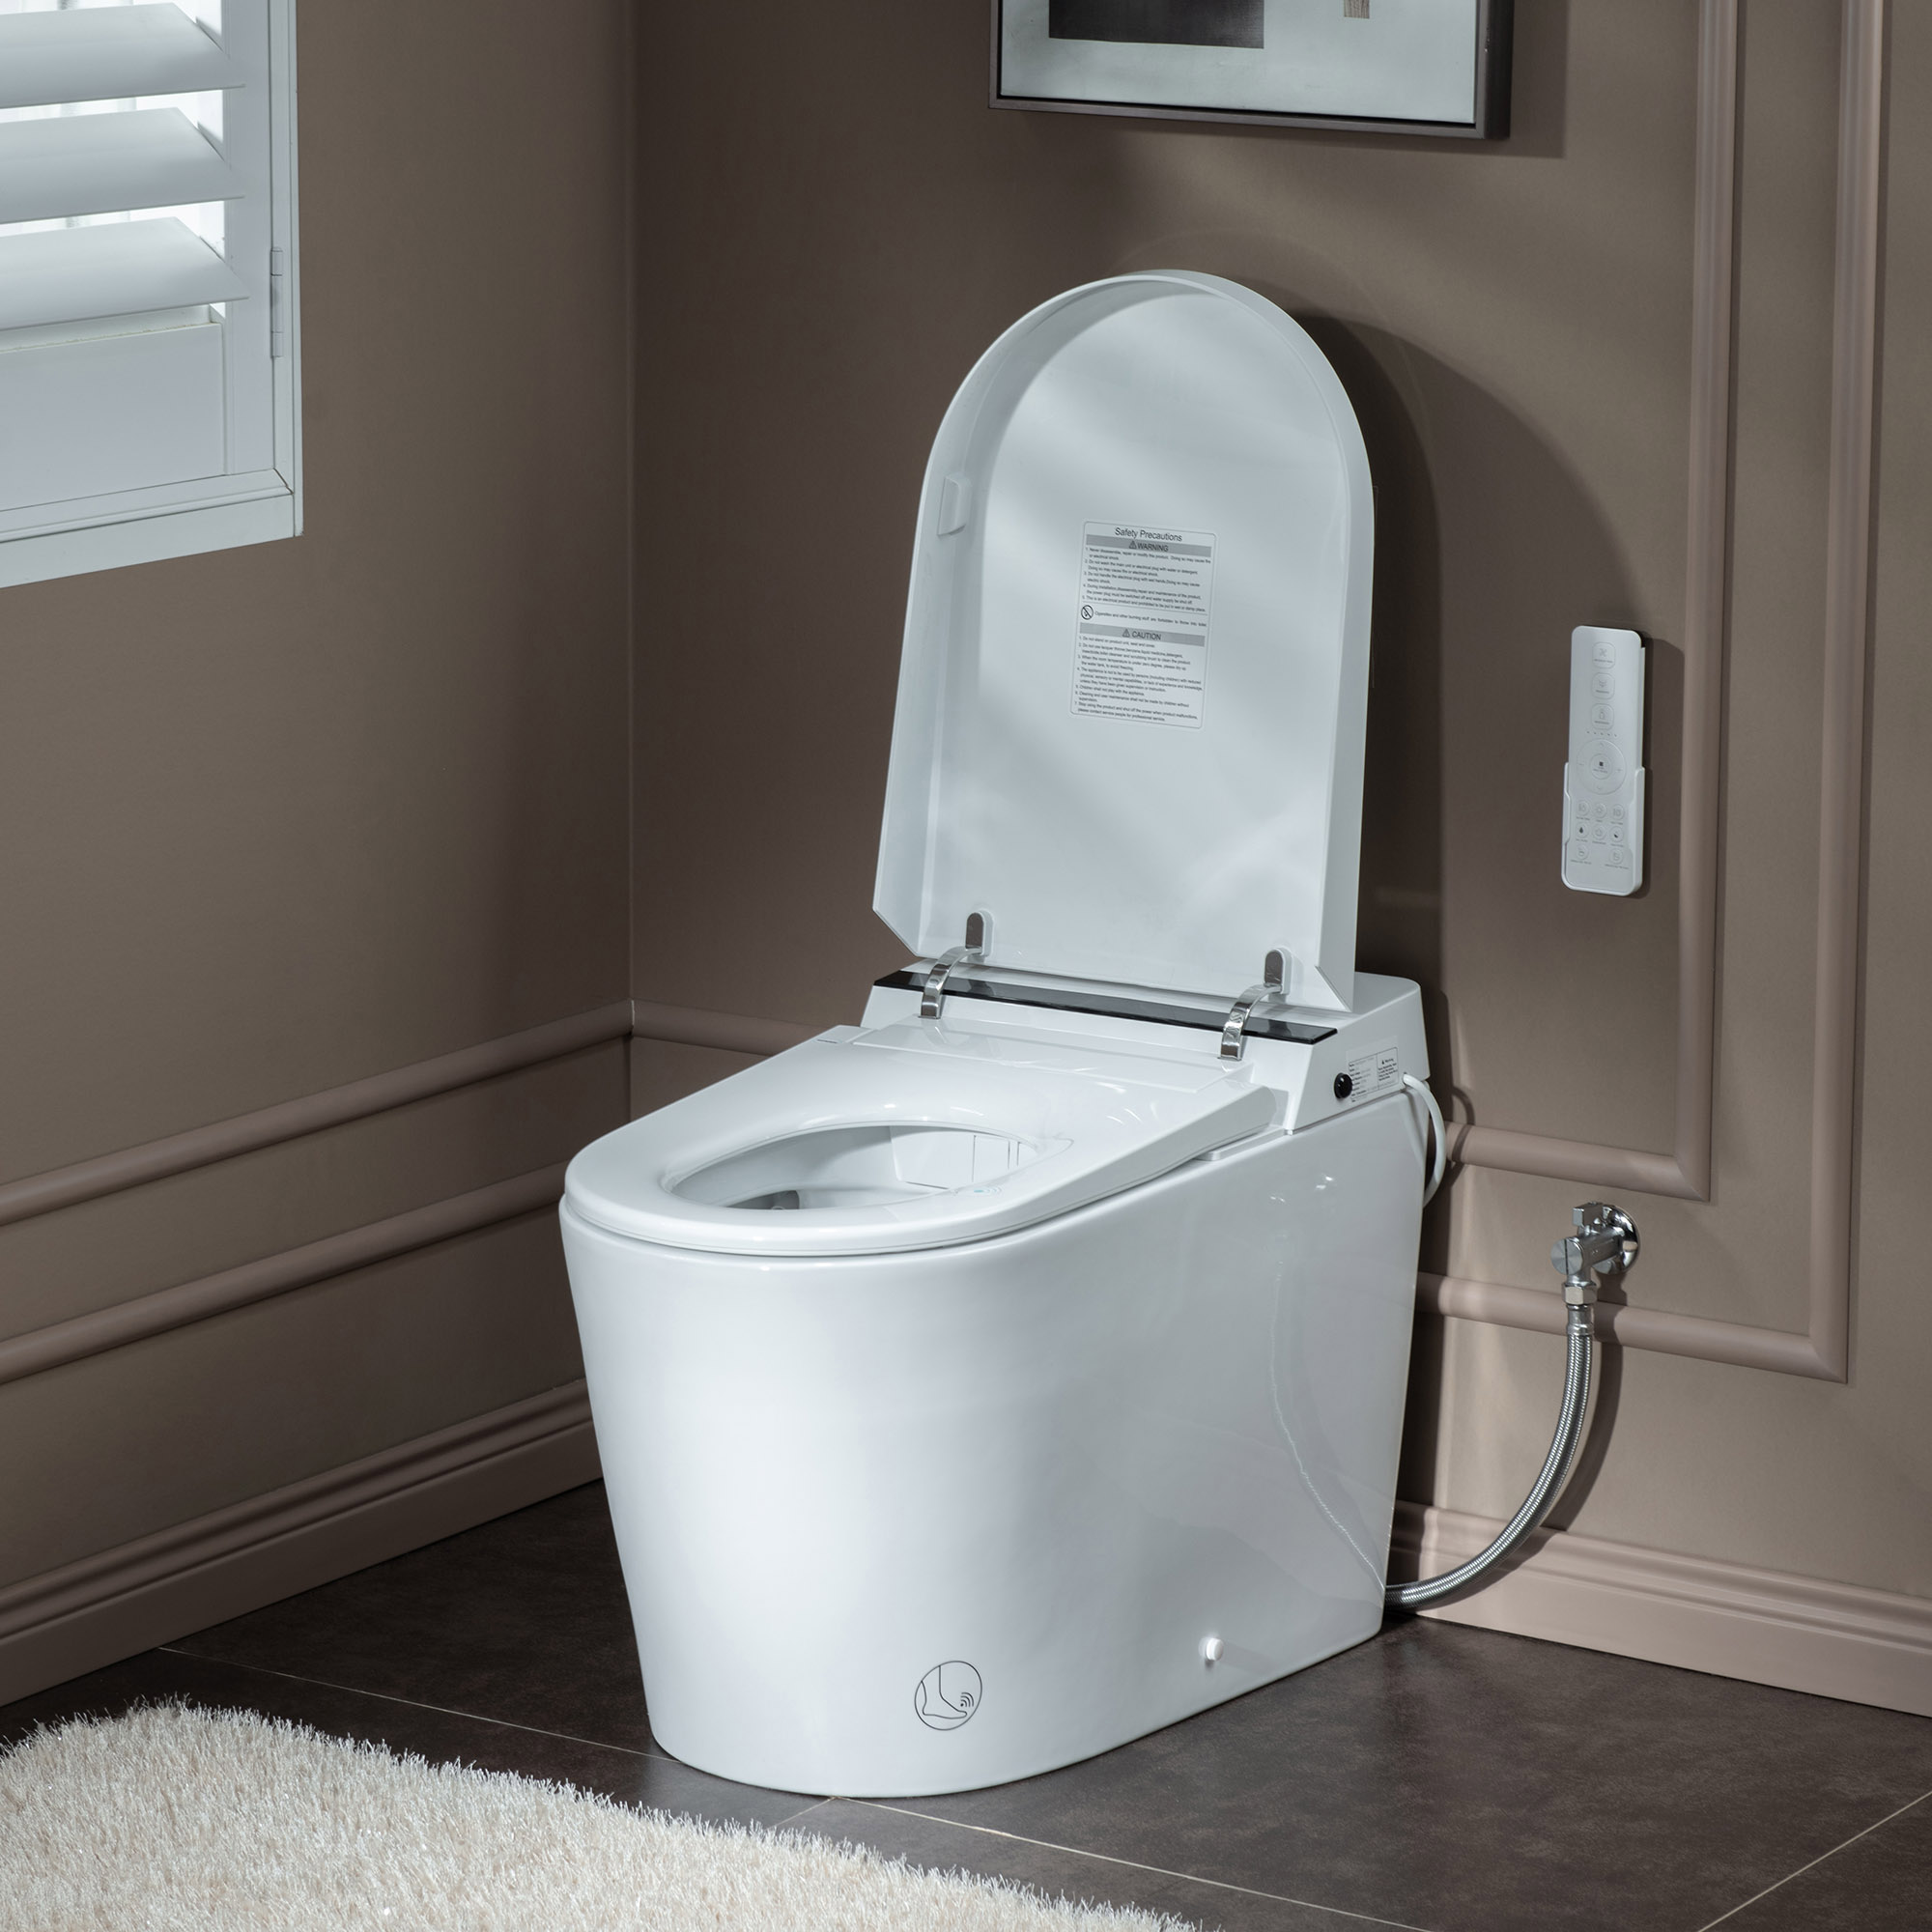  WOODBRIDGE B0990S One Piece Elongated Smart Toilet Bidet with Auto Open & Close, Auto Flush, Foot Sensor Flush, LED Temperature Display, Heated Seat and Integrated Multi Function Remote Control, White_2118